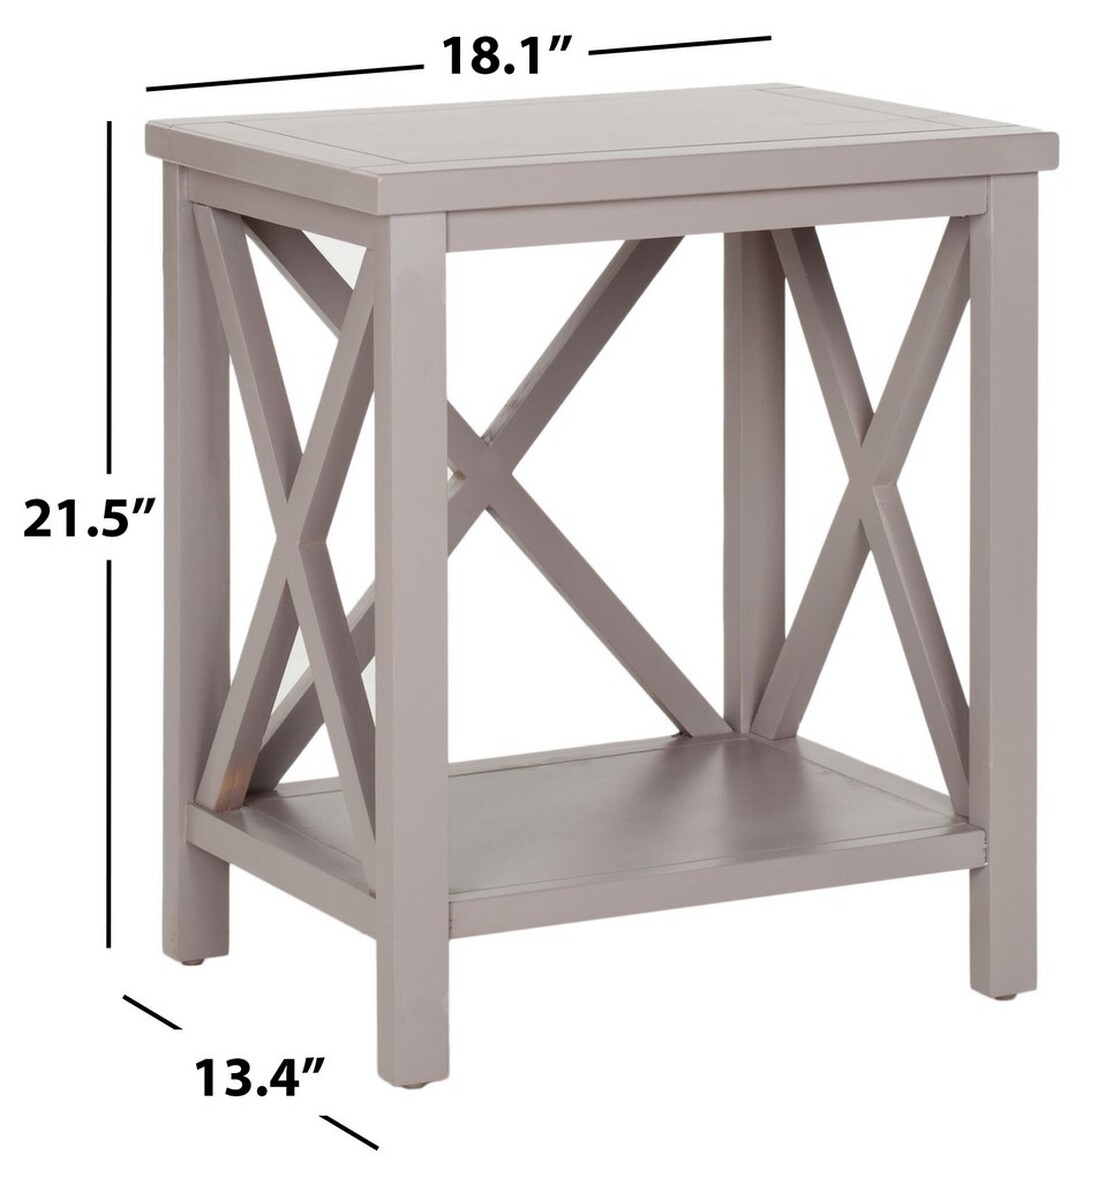 Candence Cross Back End Table - Quartz Grey - Arlo Home - Image 3